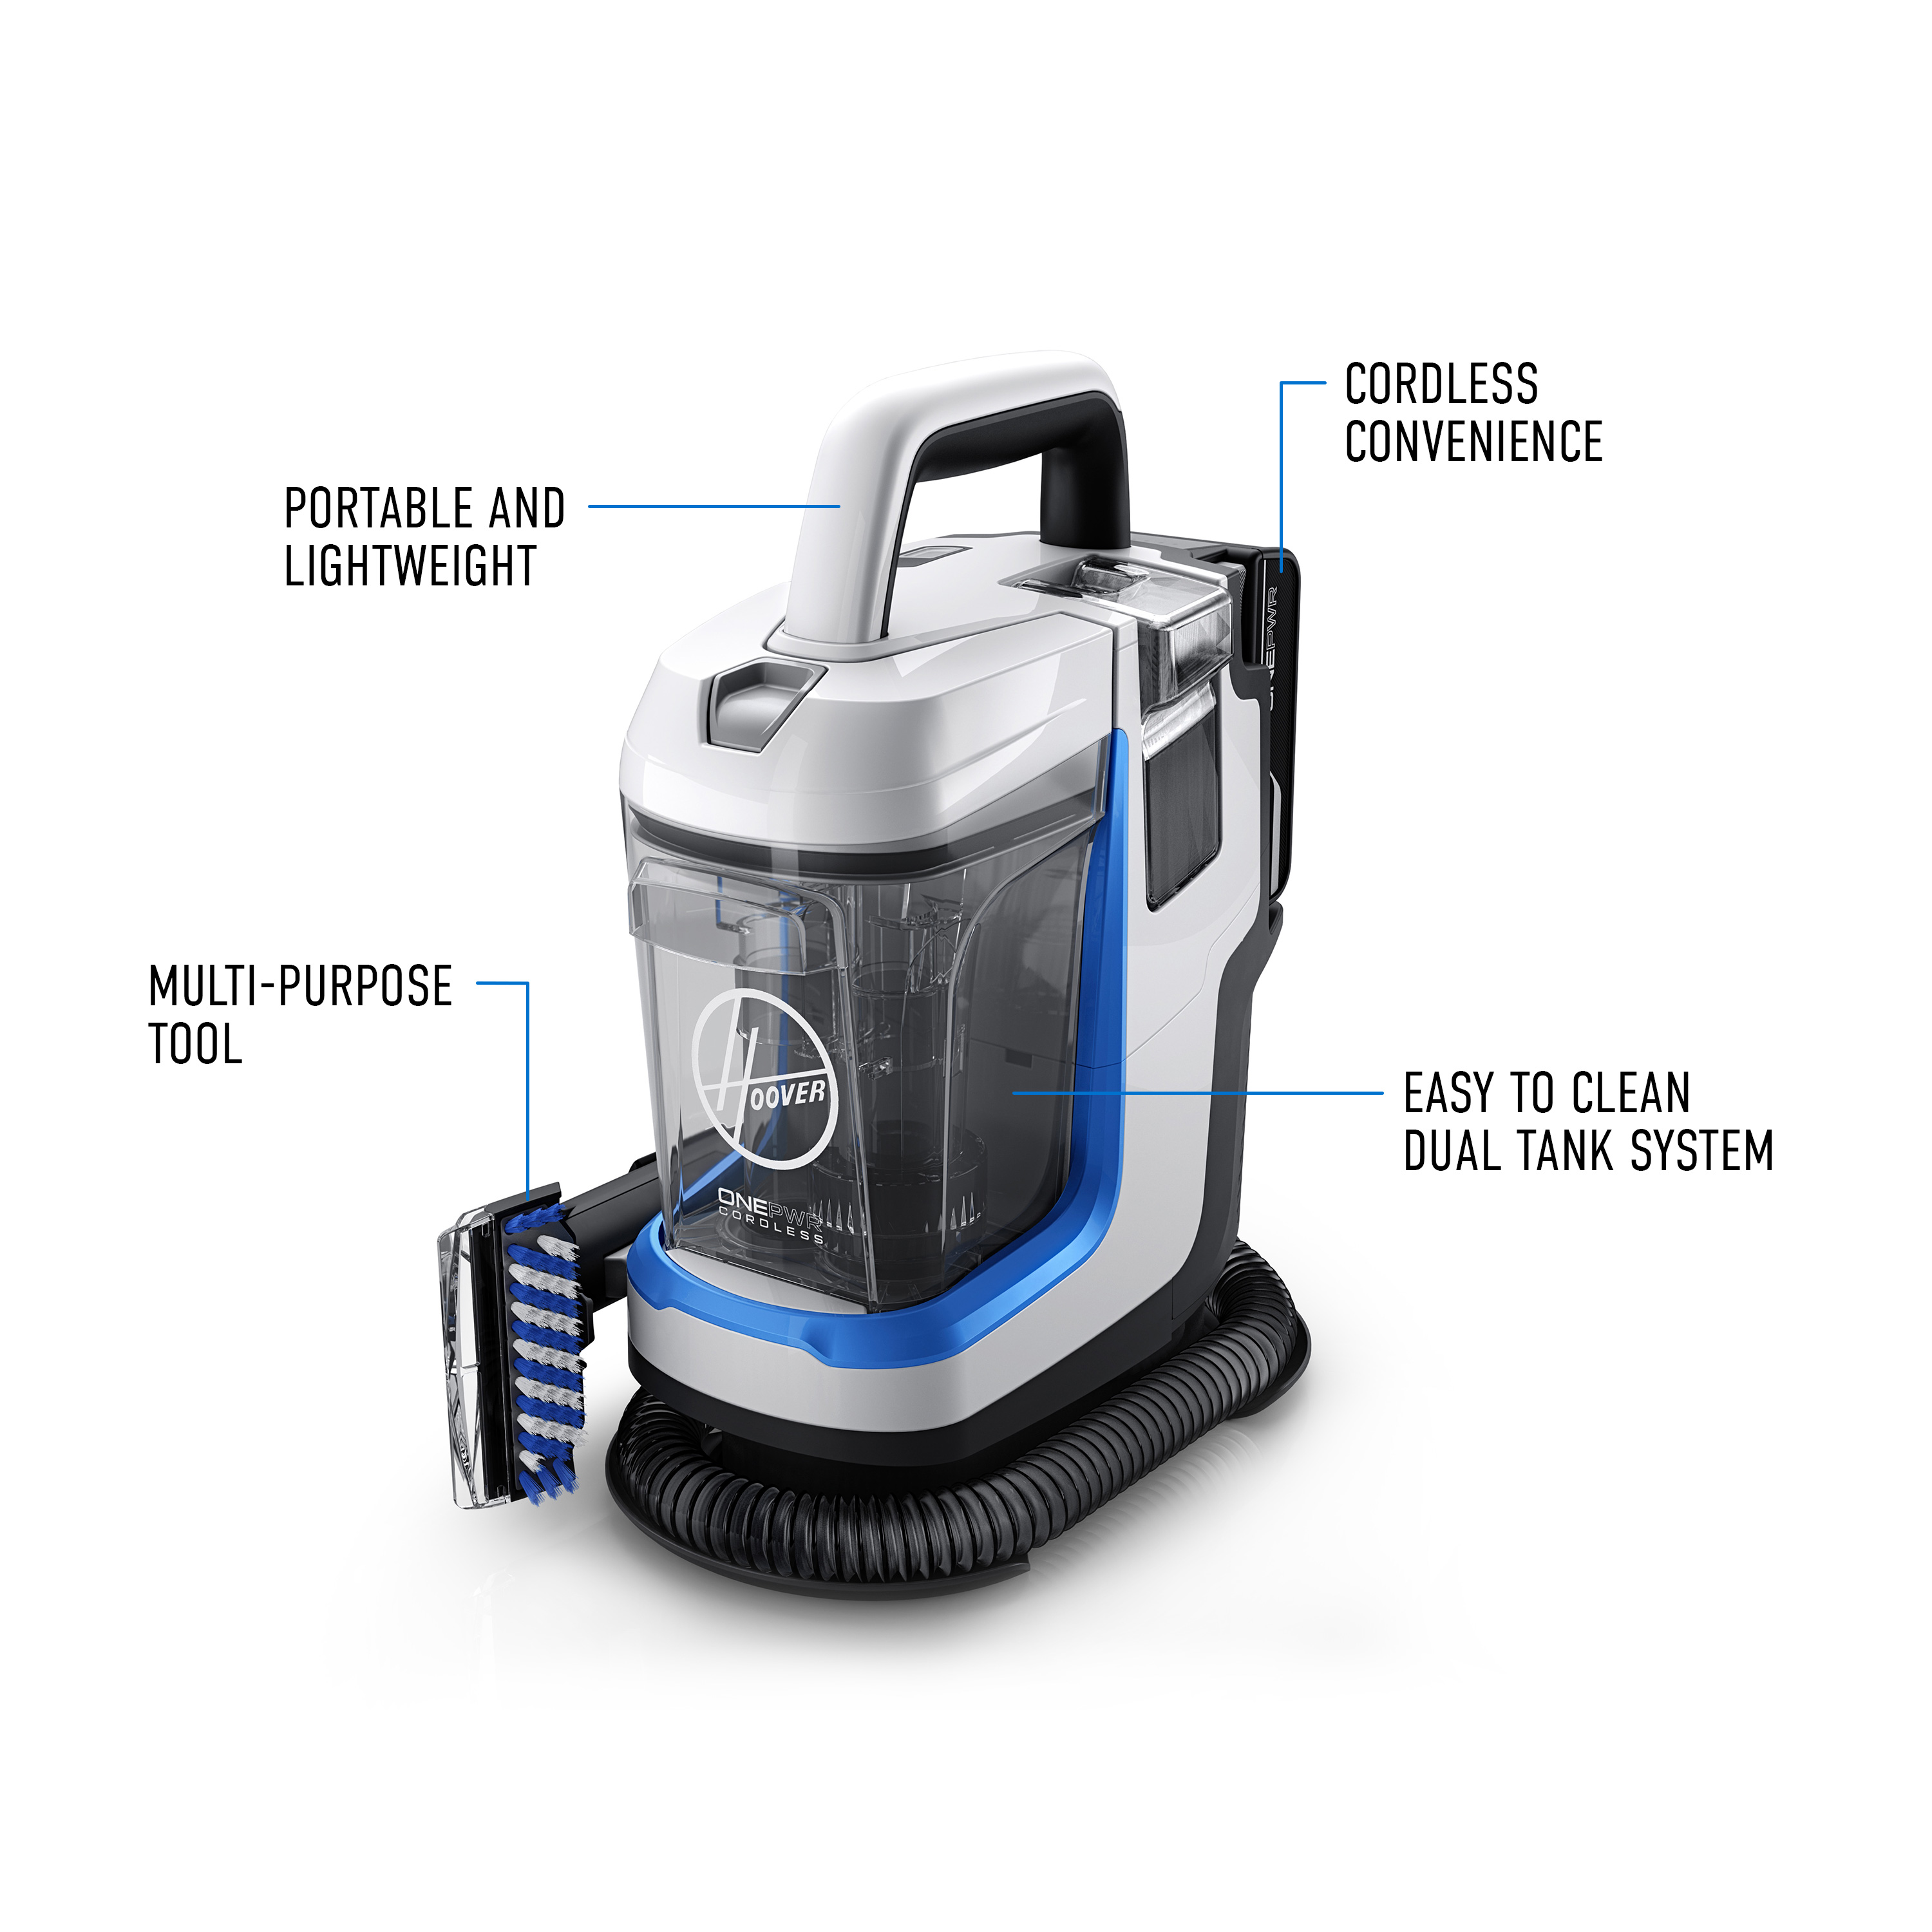 Hoover ONEPWR Spotless GO Cordless Portable Carpet Spot Cleaner, BH12001 - image 3 of 9